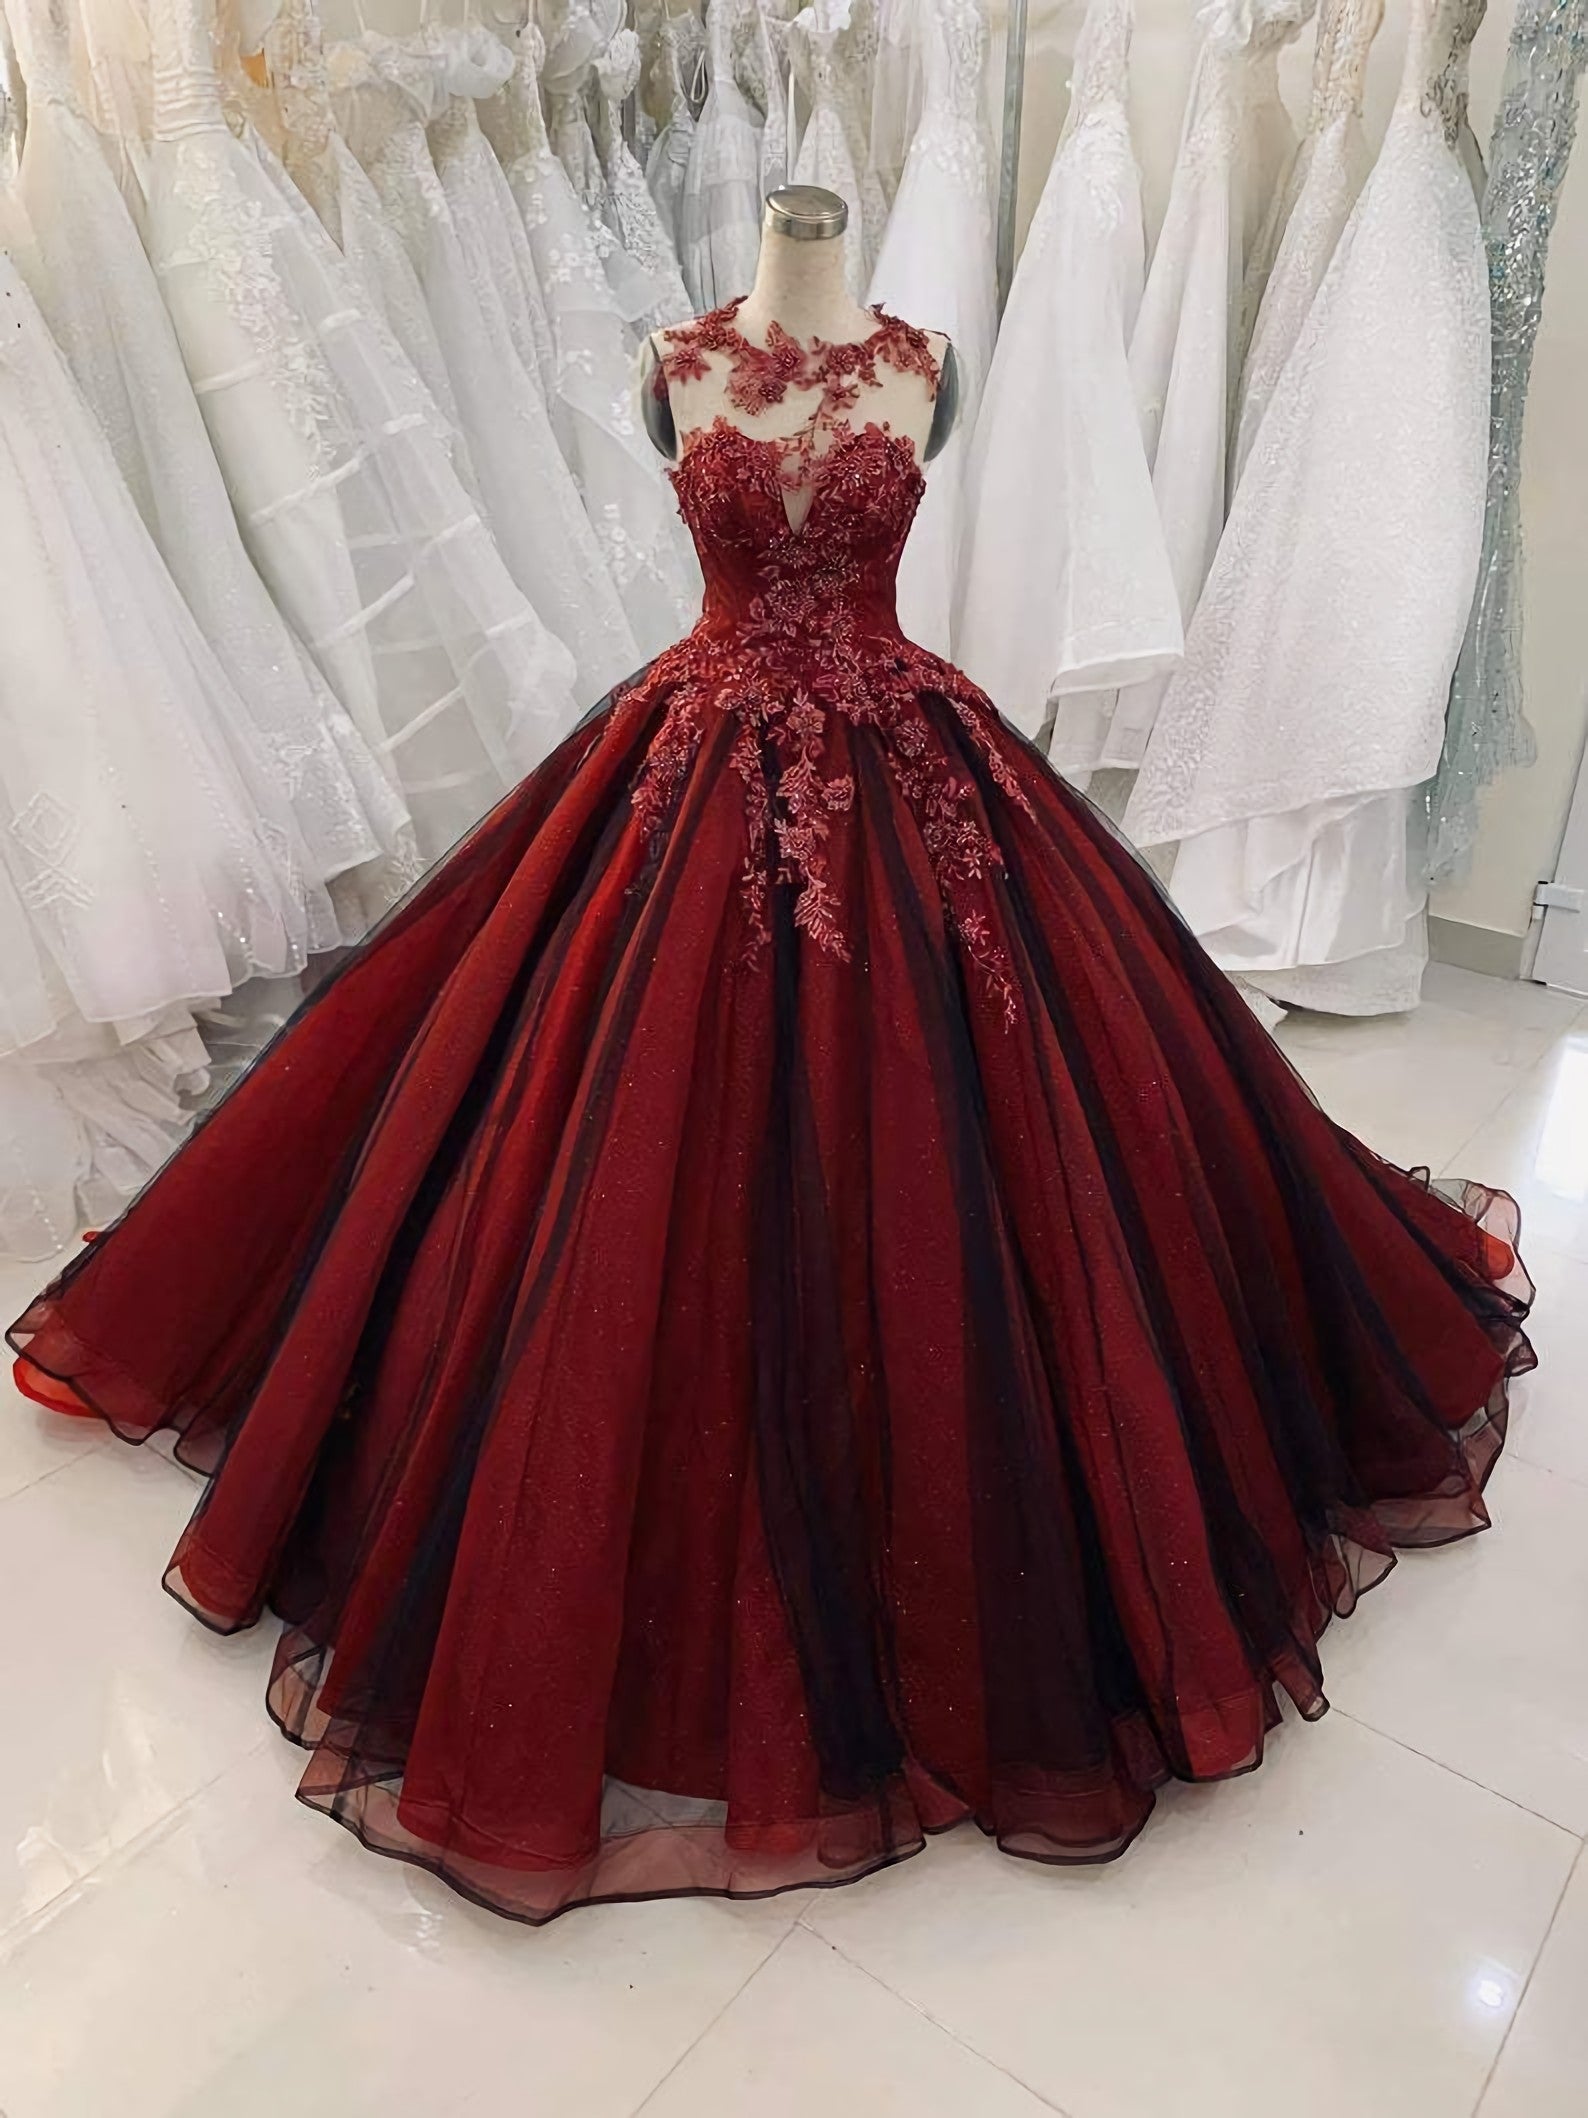 Wedding Dress 2025, Unique Red Vintage Wedding Dress, Made To Measure Wedding Dress, Prom Dress, Party Gown